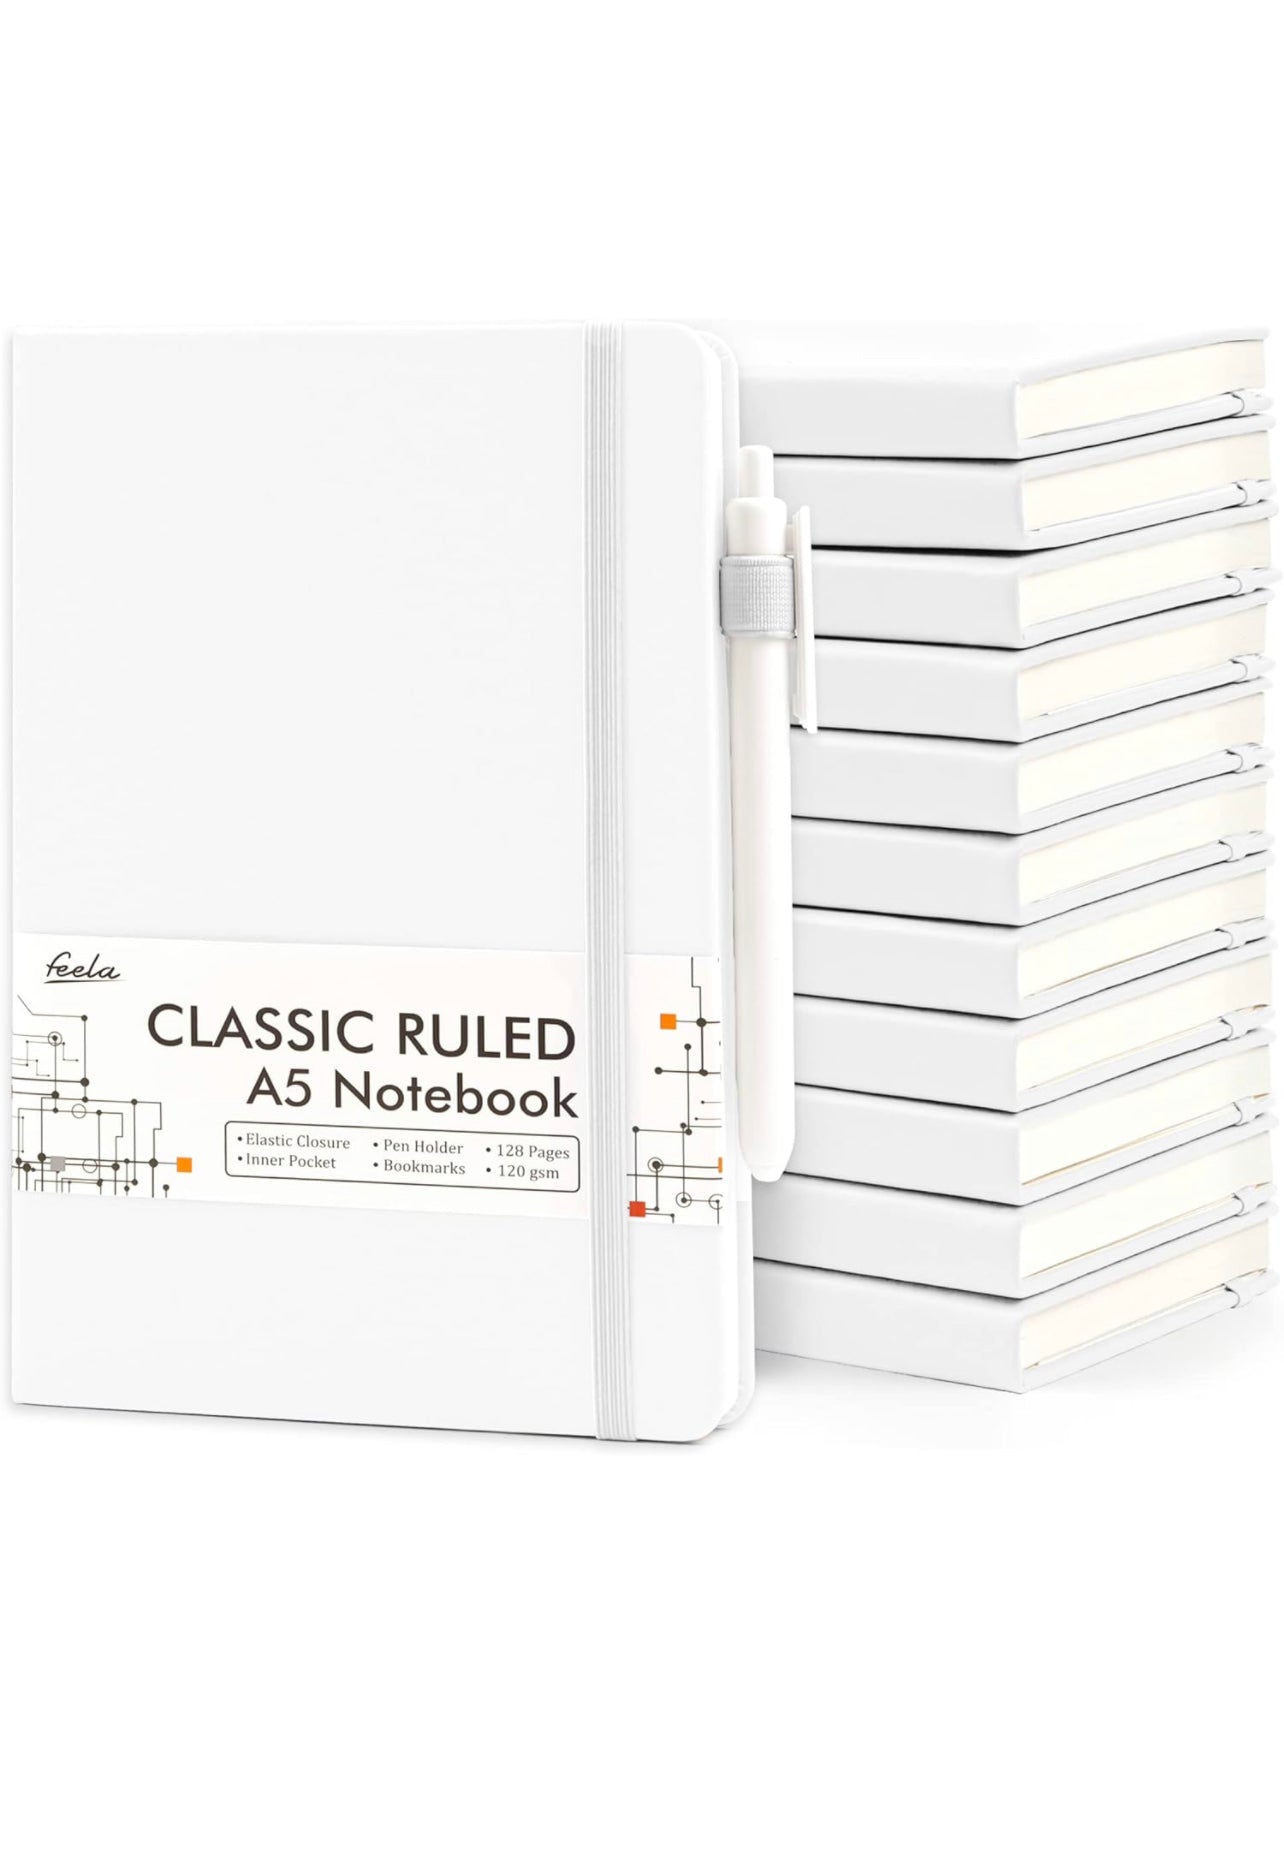 Design Personalized Faux Leather Hardcover Journal-White